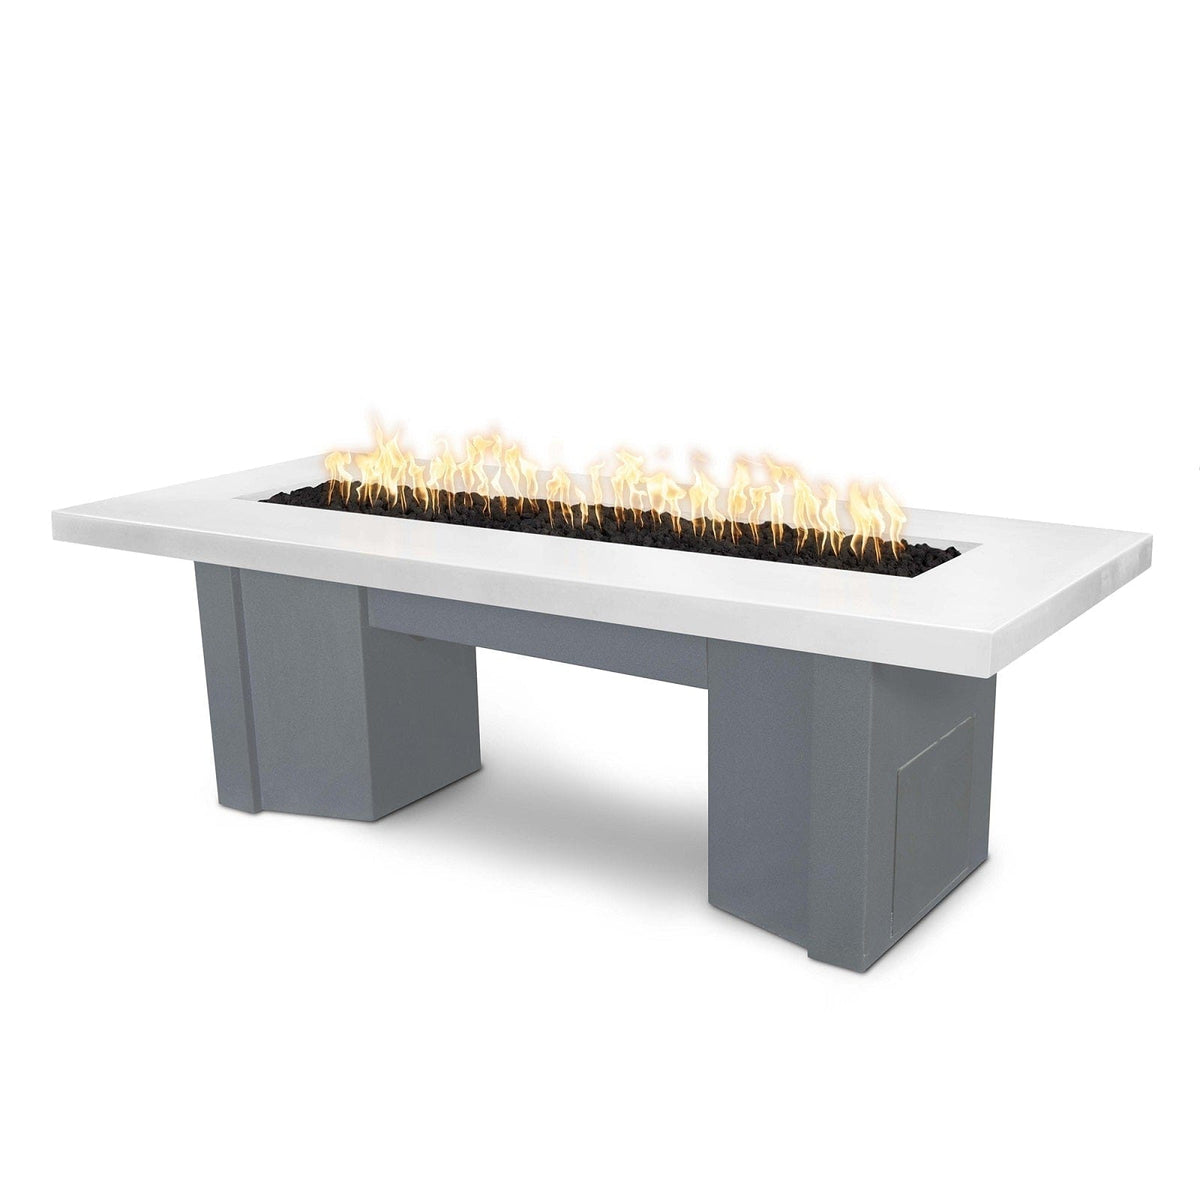 The Outdoor Plus Fire Features Limestone (-LIM) / Gray Powder Coated Steel (-GRY) The Outdoor Plus 78&quot; Alameda Fire Table Smooth Concrete in Liquid Propane - Match Lit / OPT-ALMGFRC78-LP